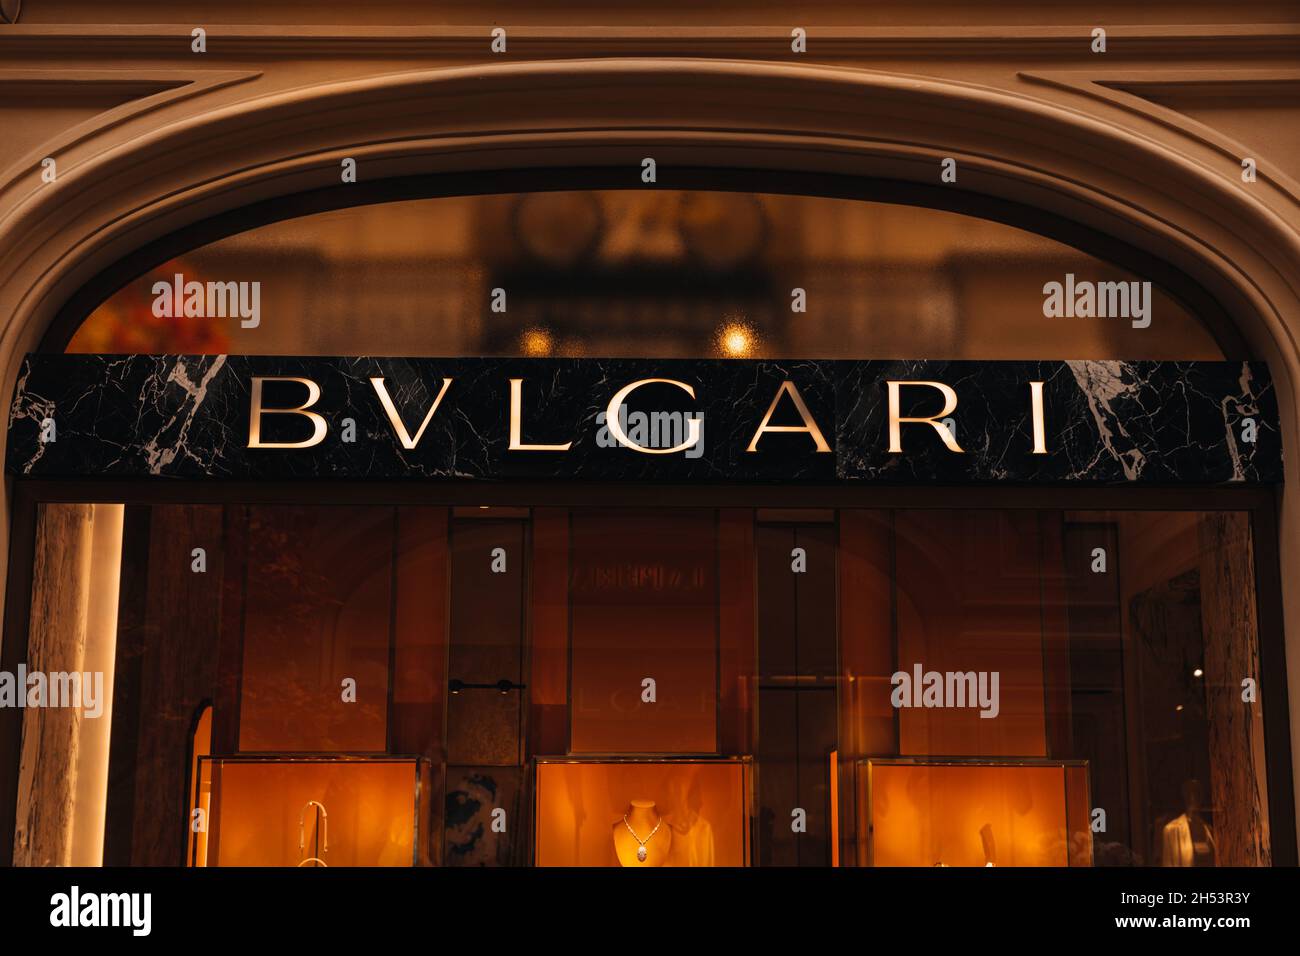 MOSCOW, RUSSIA - SEPTEMBER 23, 2021: Bulgari retail shop logo singboard on the storefront in the shopping mall. Bulgari is an italian luxury brand kno Stock Photo